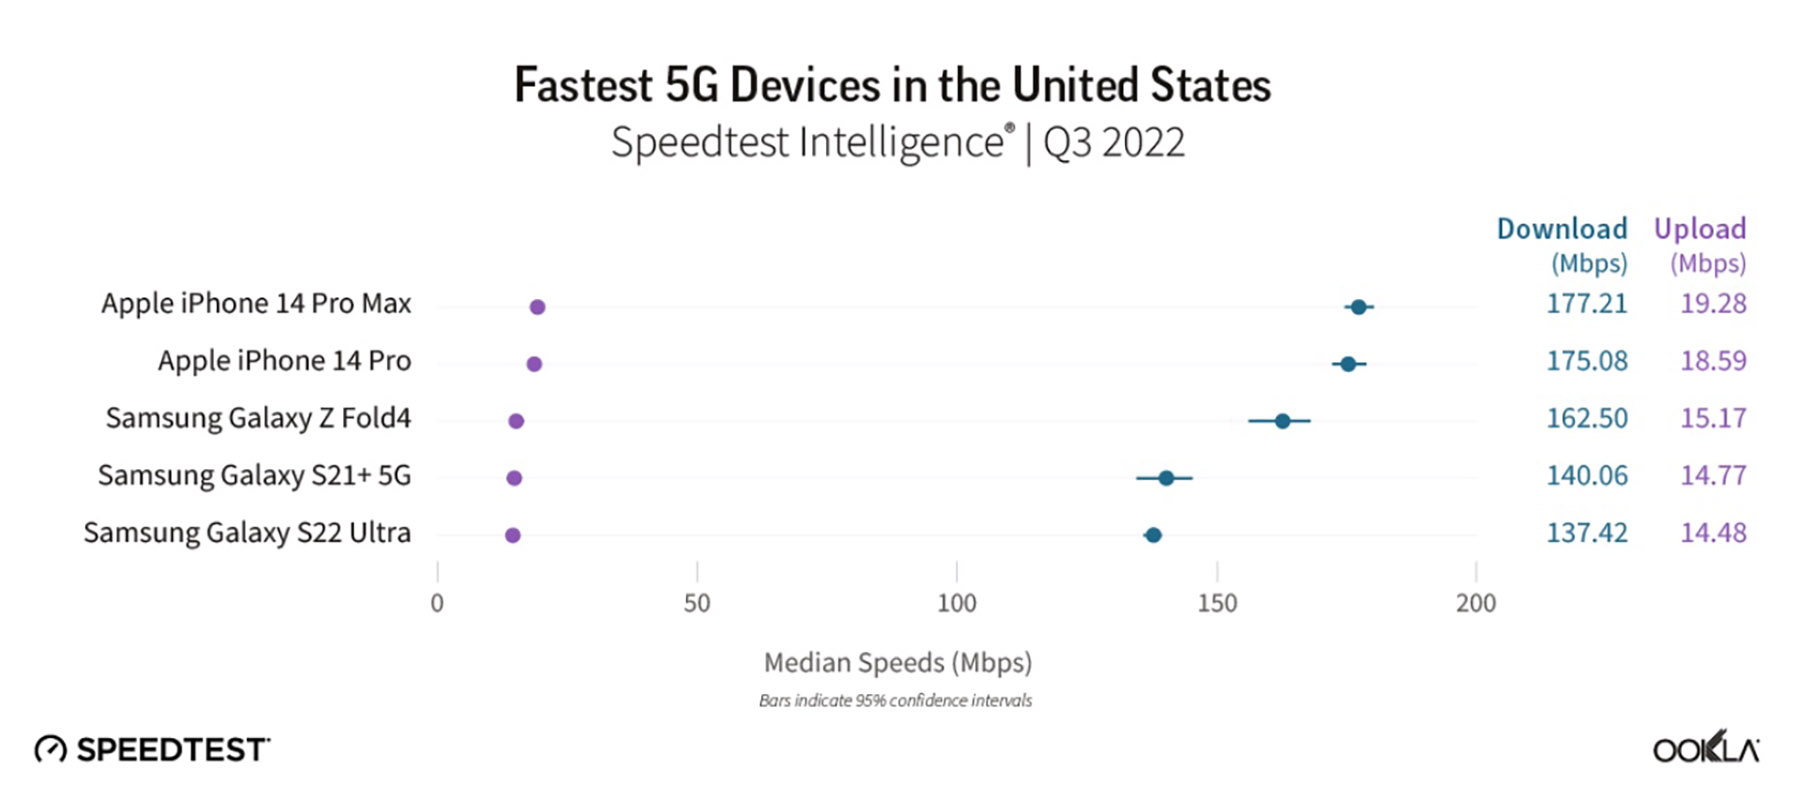 The Fastest 5G Devices in the US